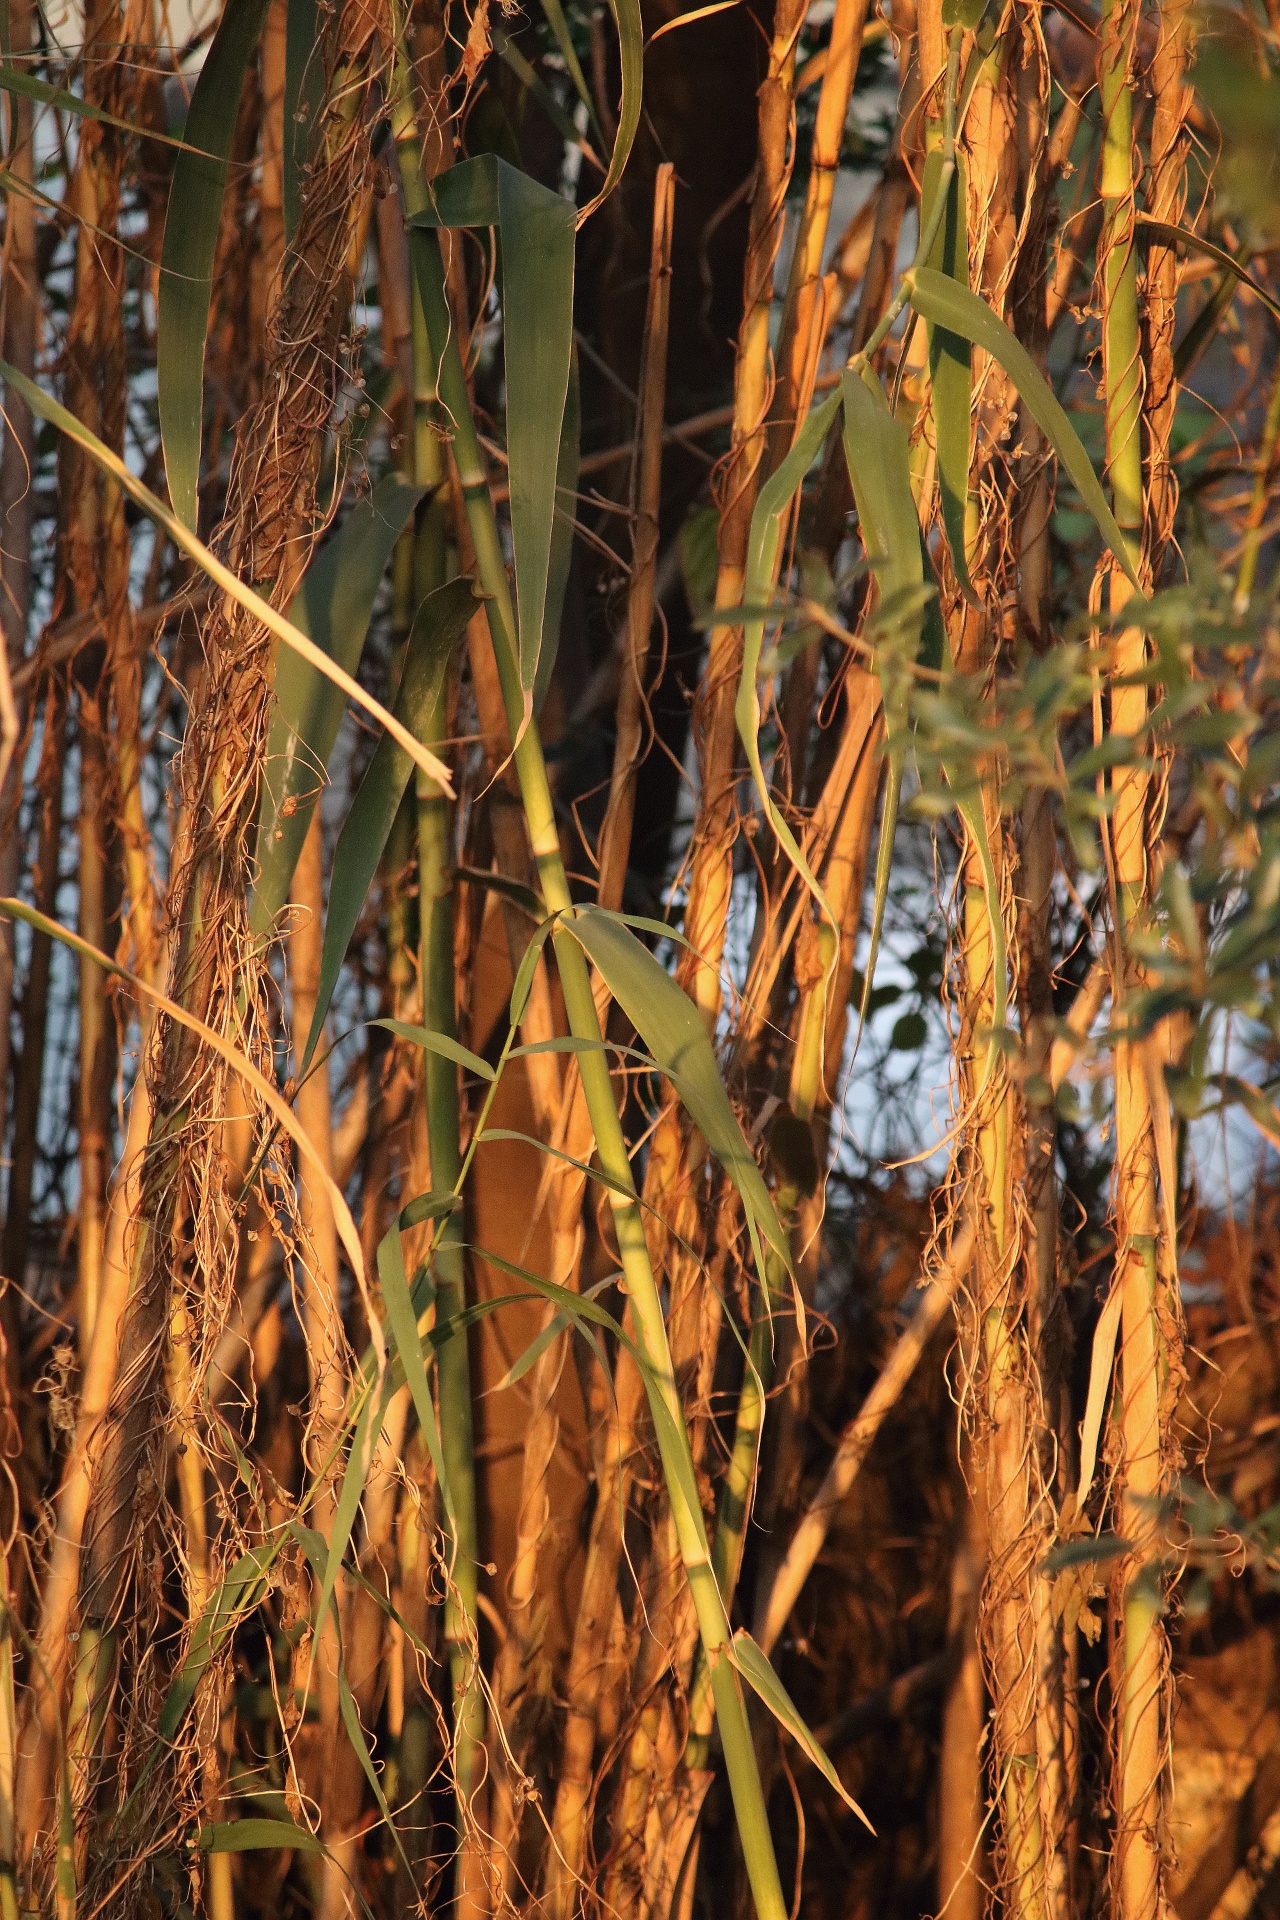 Reeds In The Late Afternoon Sun